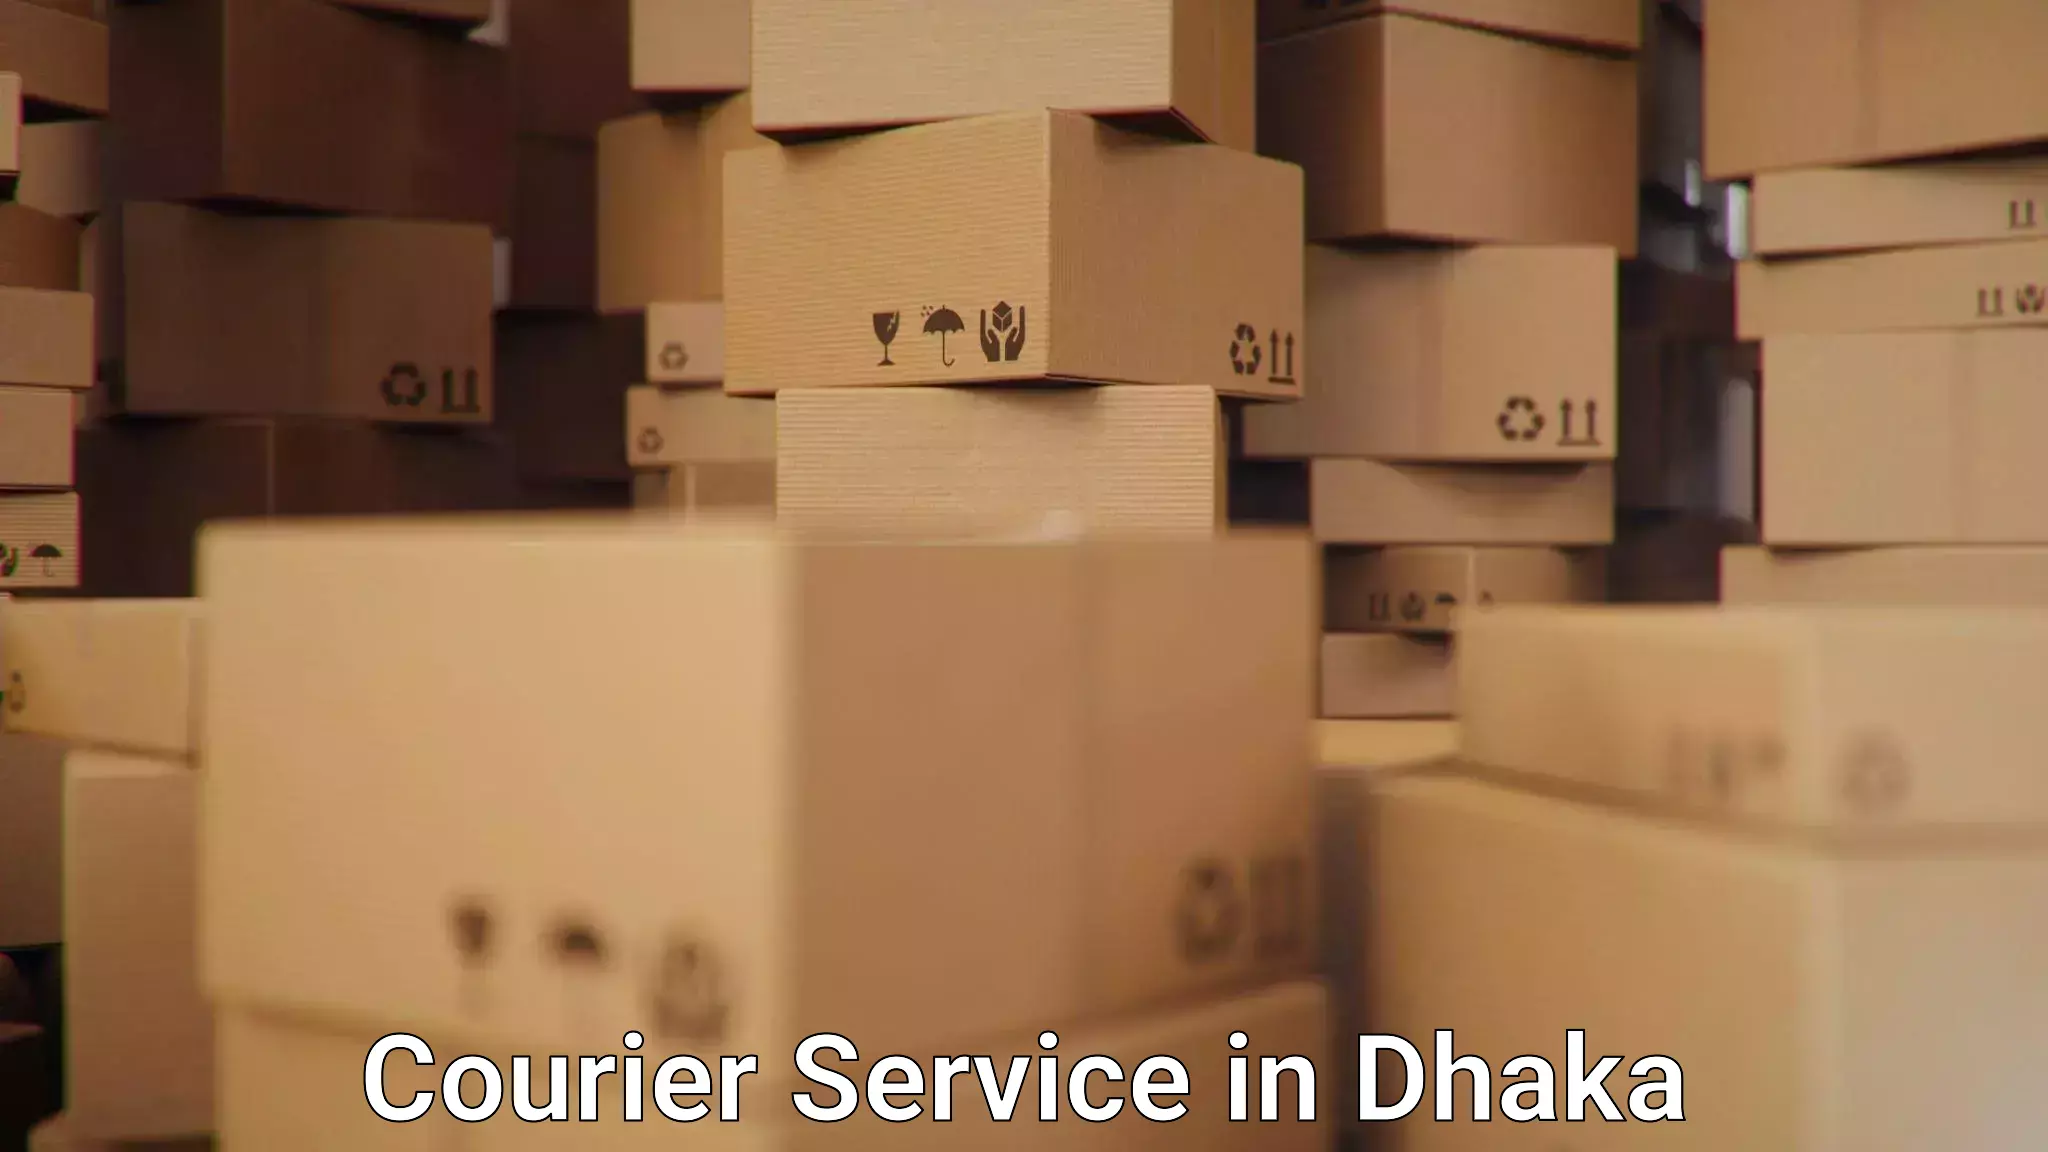 Parcel delivery automation in Dhaka